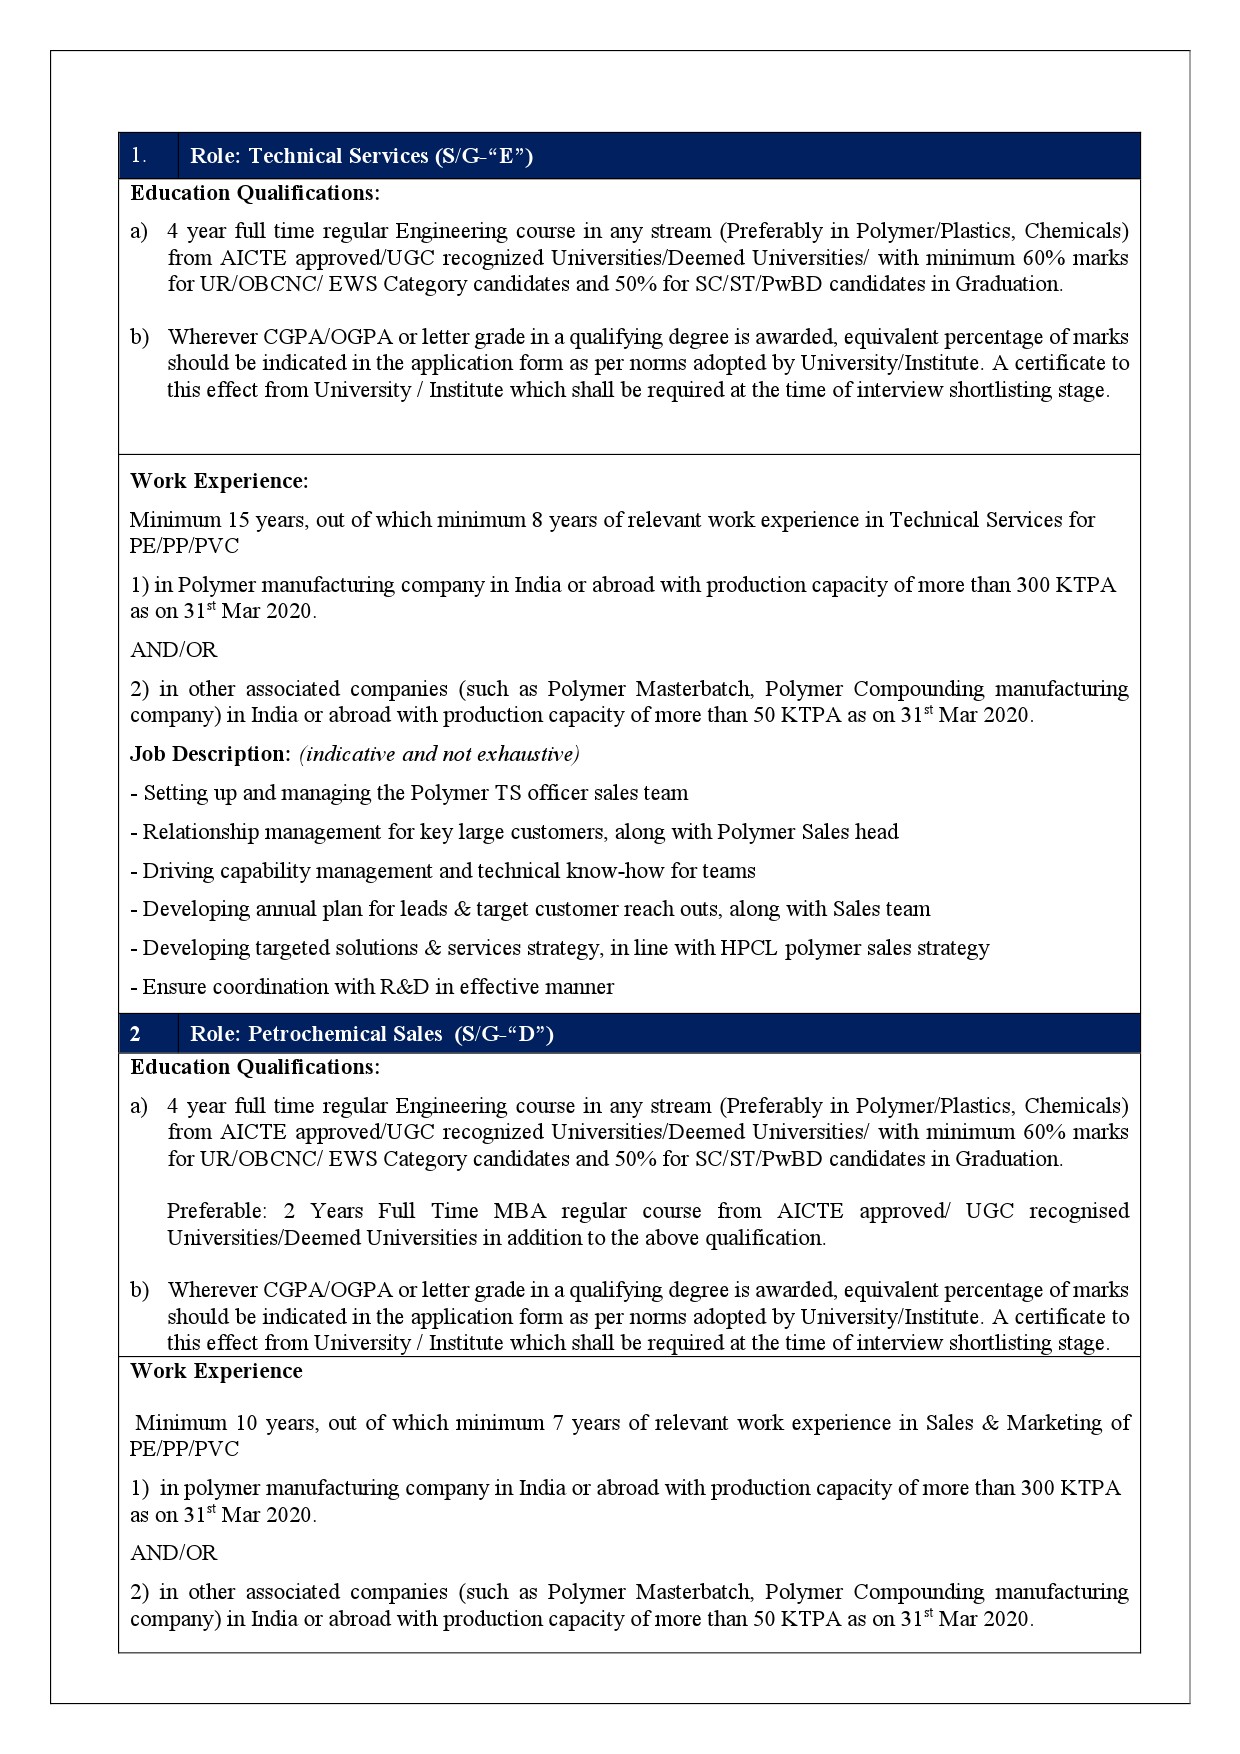 Technical Services and Petrochemical Sales in HPCL - Notification Image 2